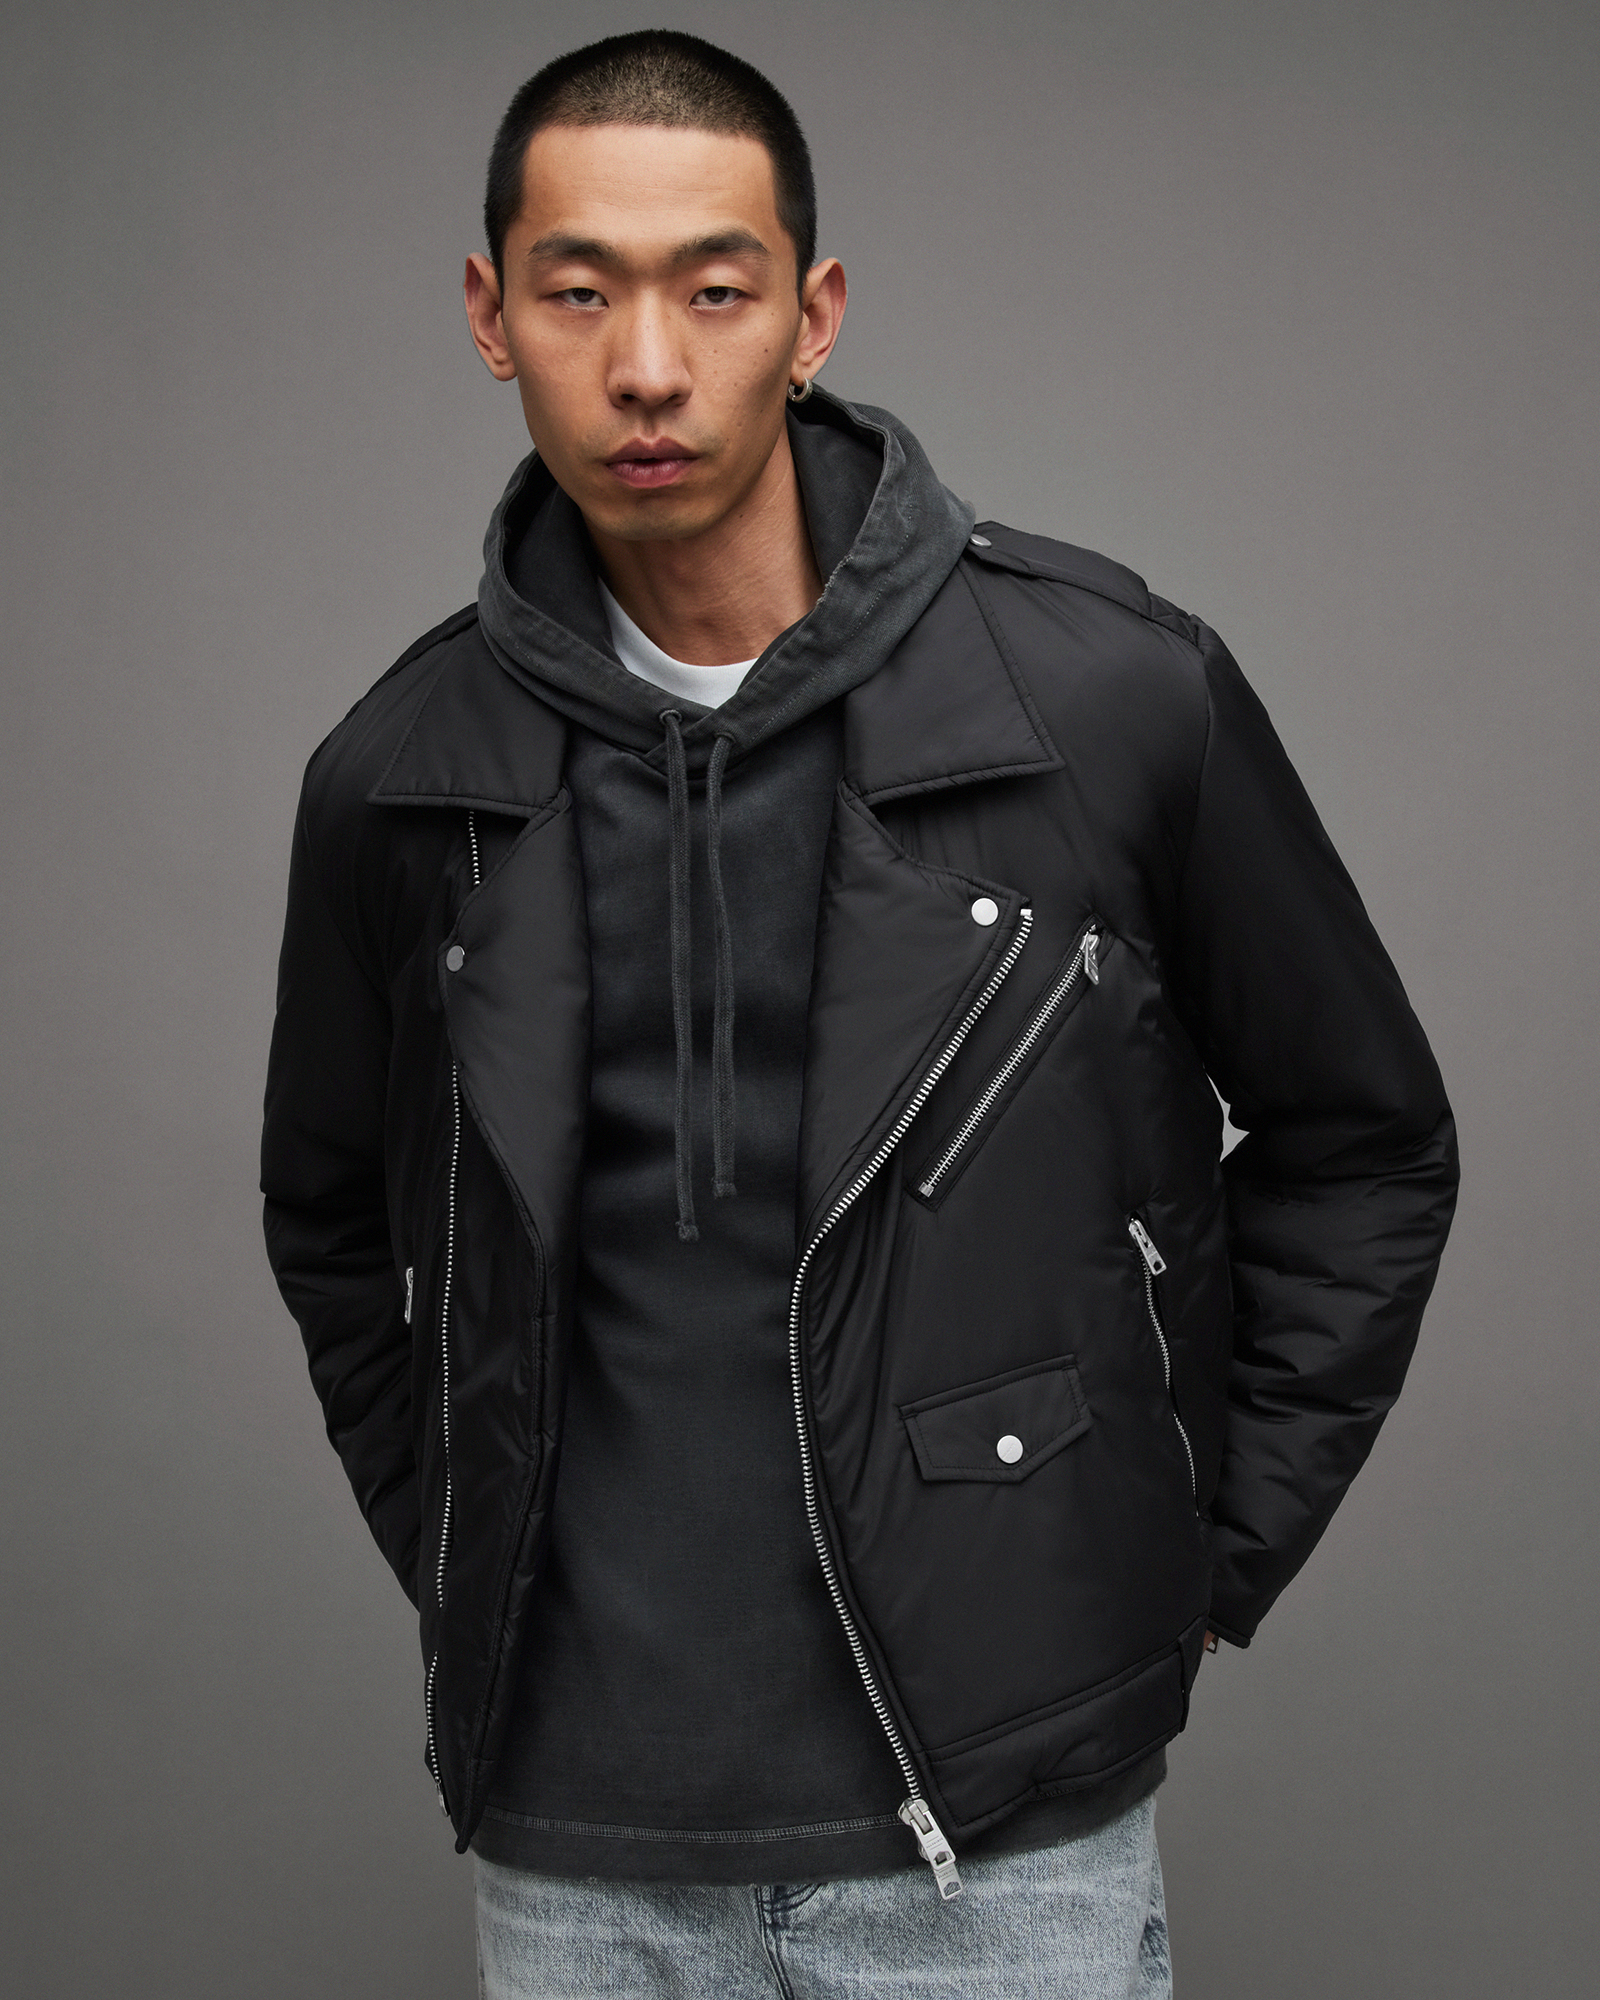 AllSaints Get Down Back Graphic Hoodie in Washed Black